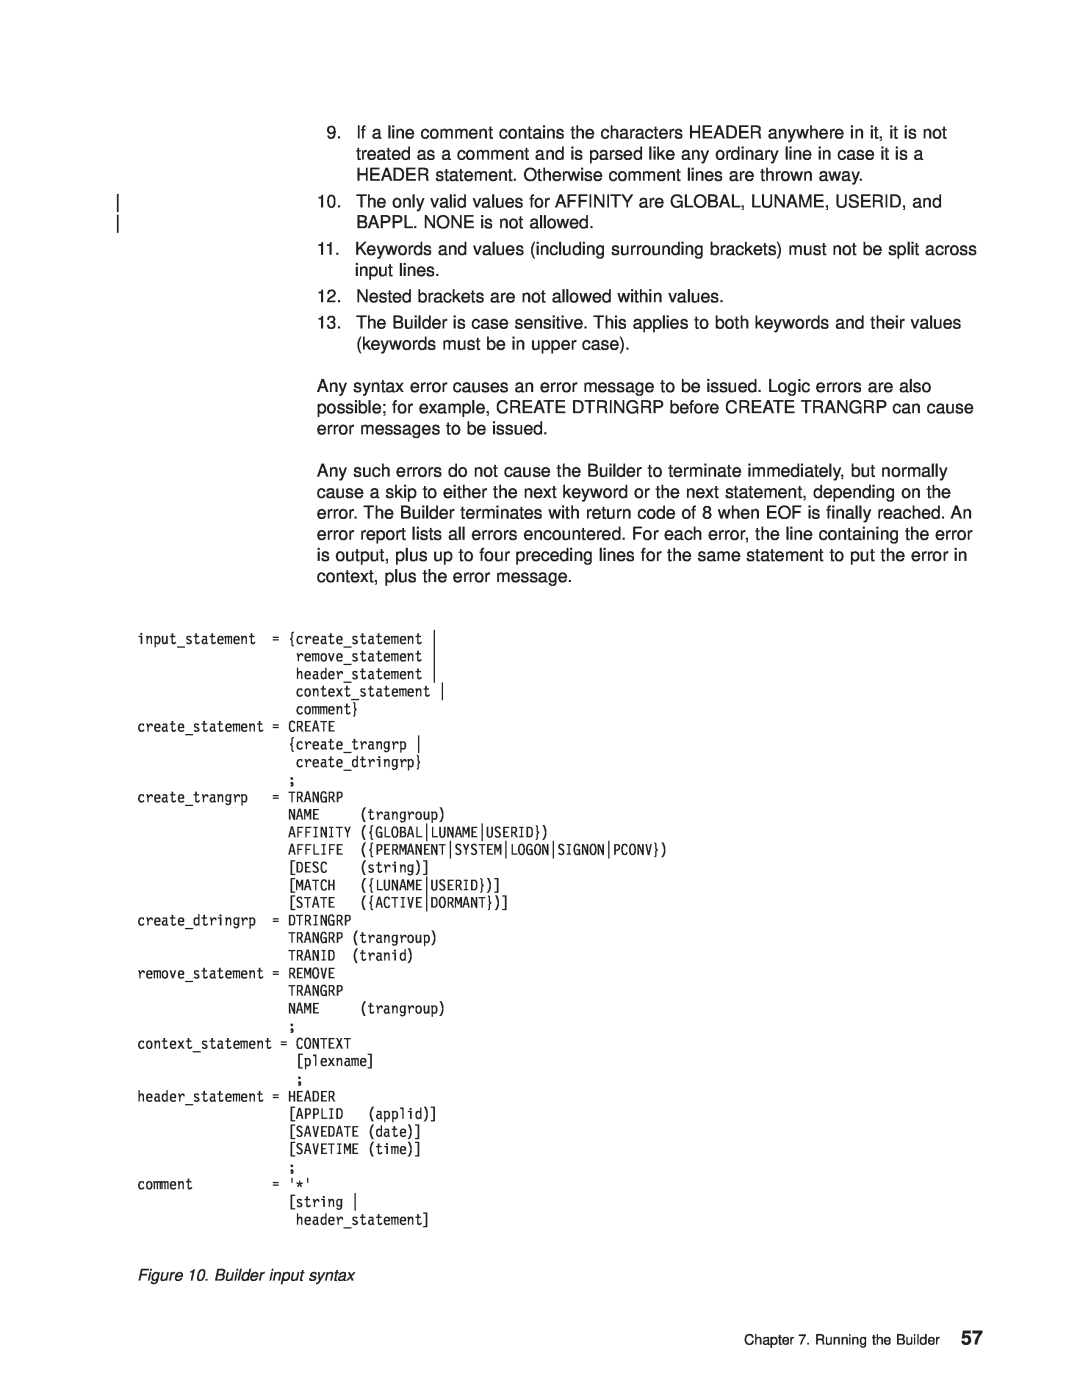 IBM OS manual HEADER statement. Otherwise comment lines are thrown away 